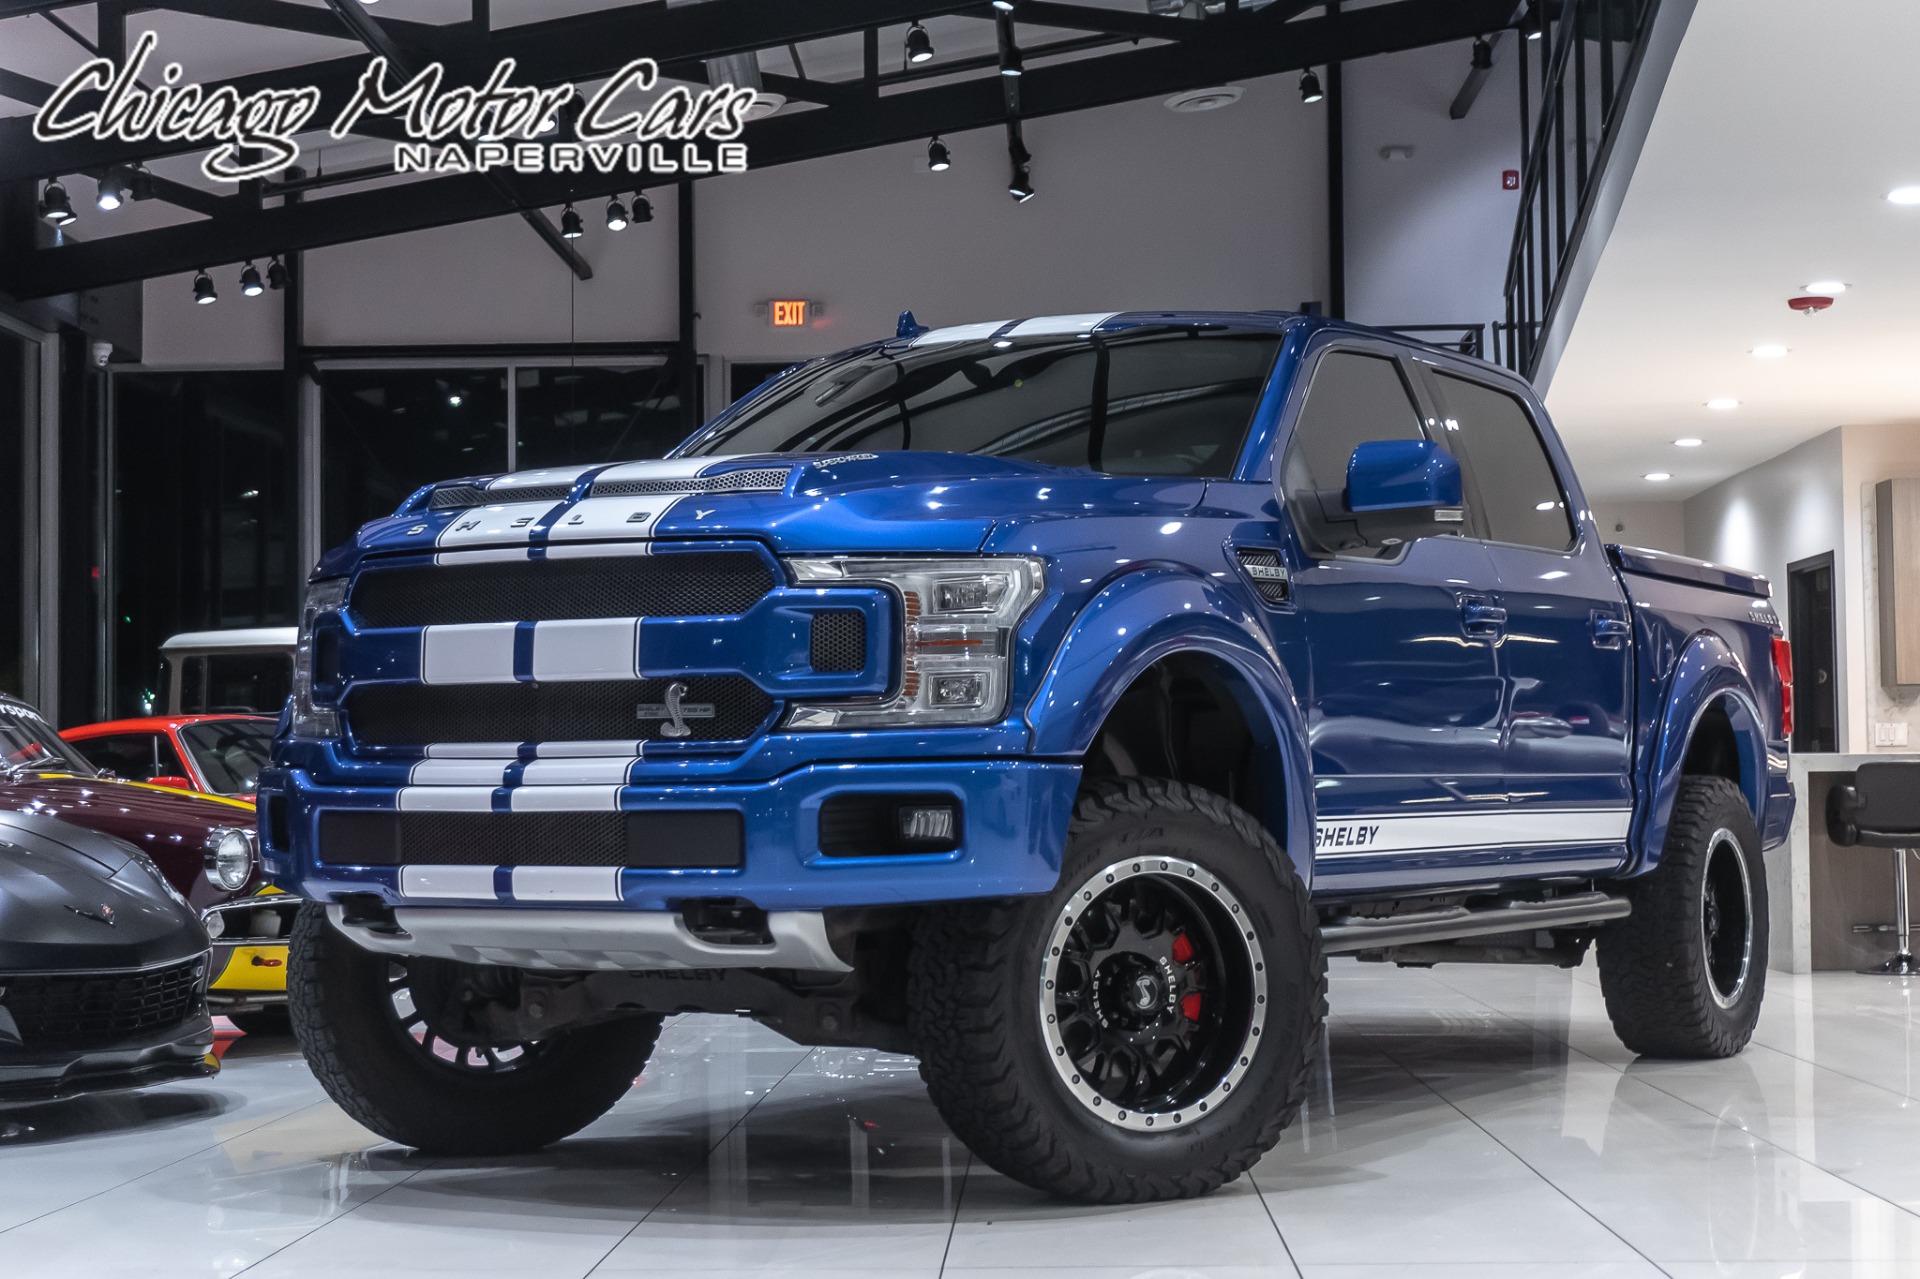 Used-2018-Ford-F150-KING-RANCH-SUPER-CREW-4X4-SHELBY-PERFORMANCE-755HP-TECH-PKG-TOW-PKG-106k-MSRP